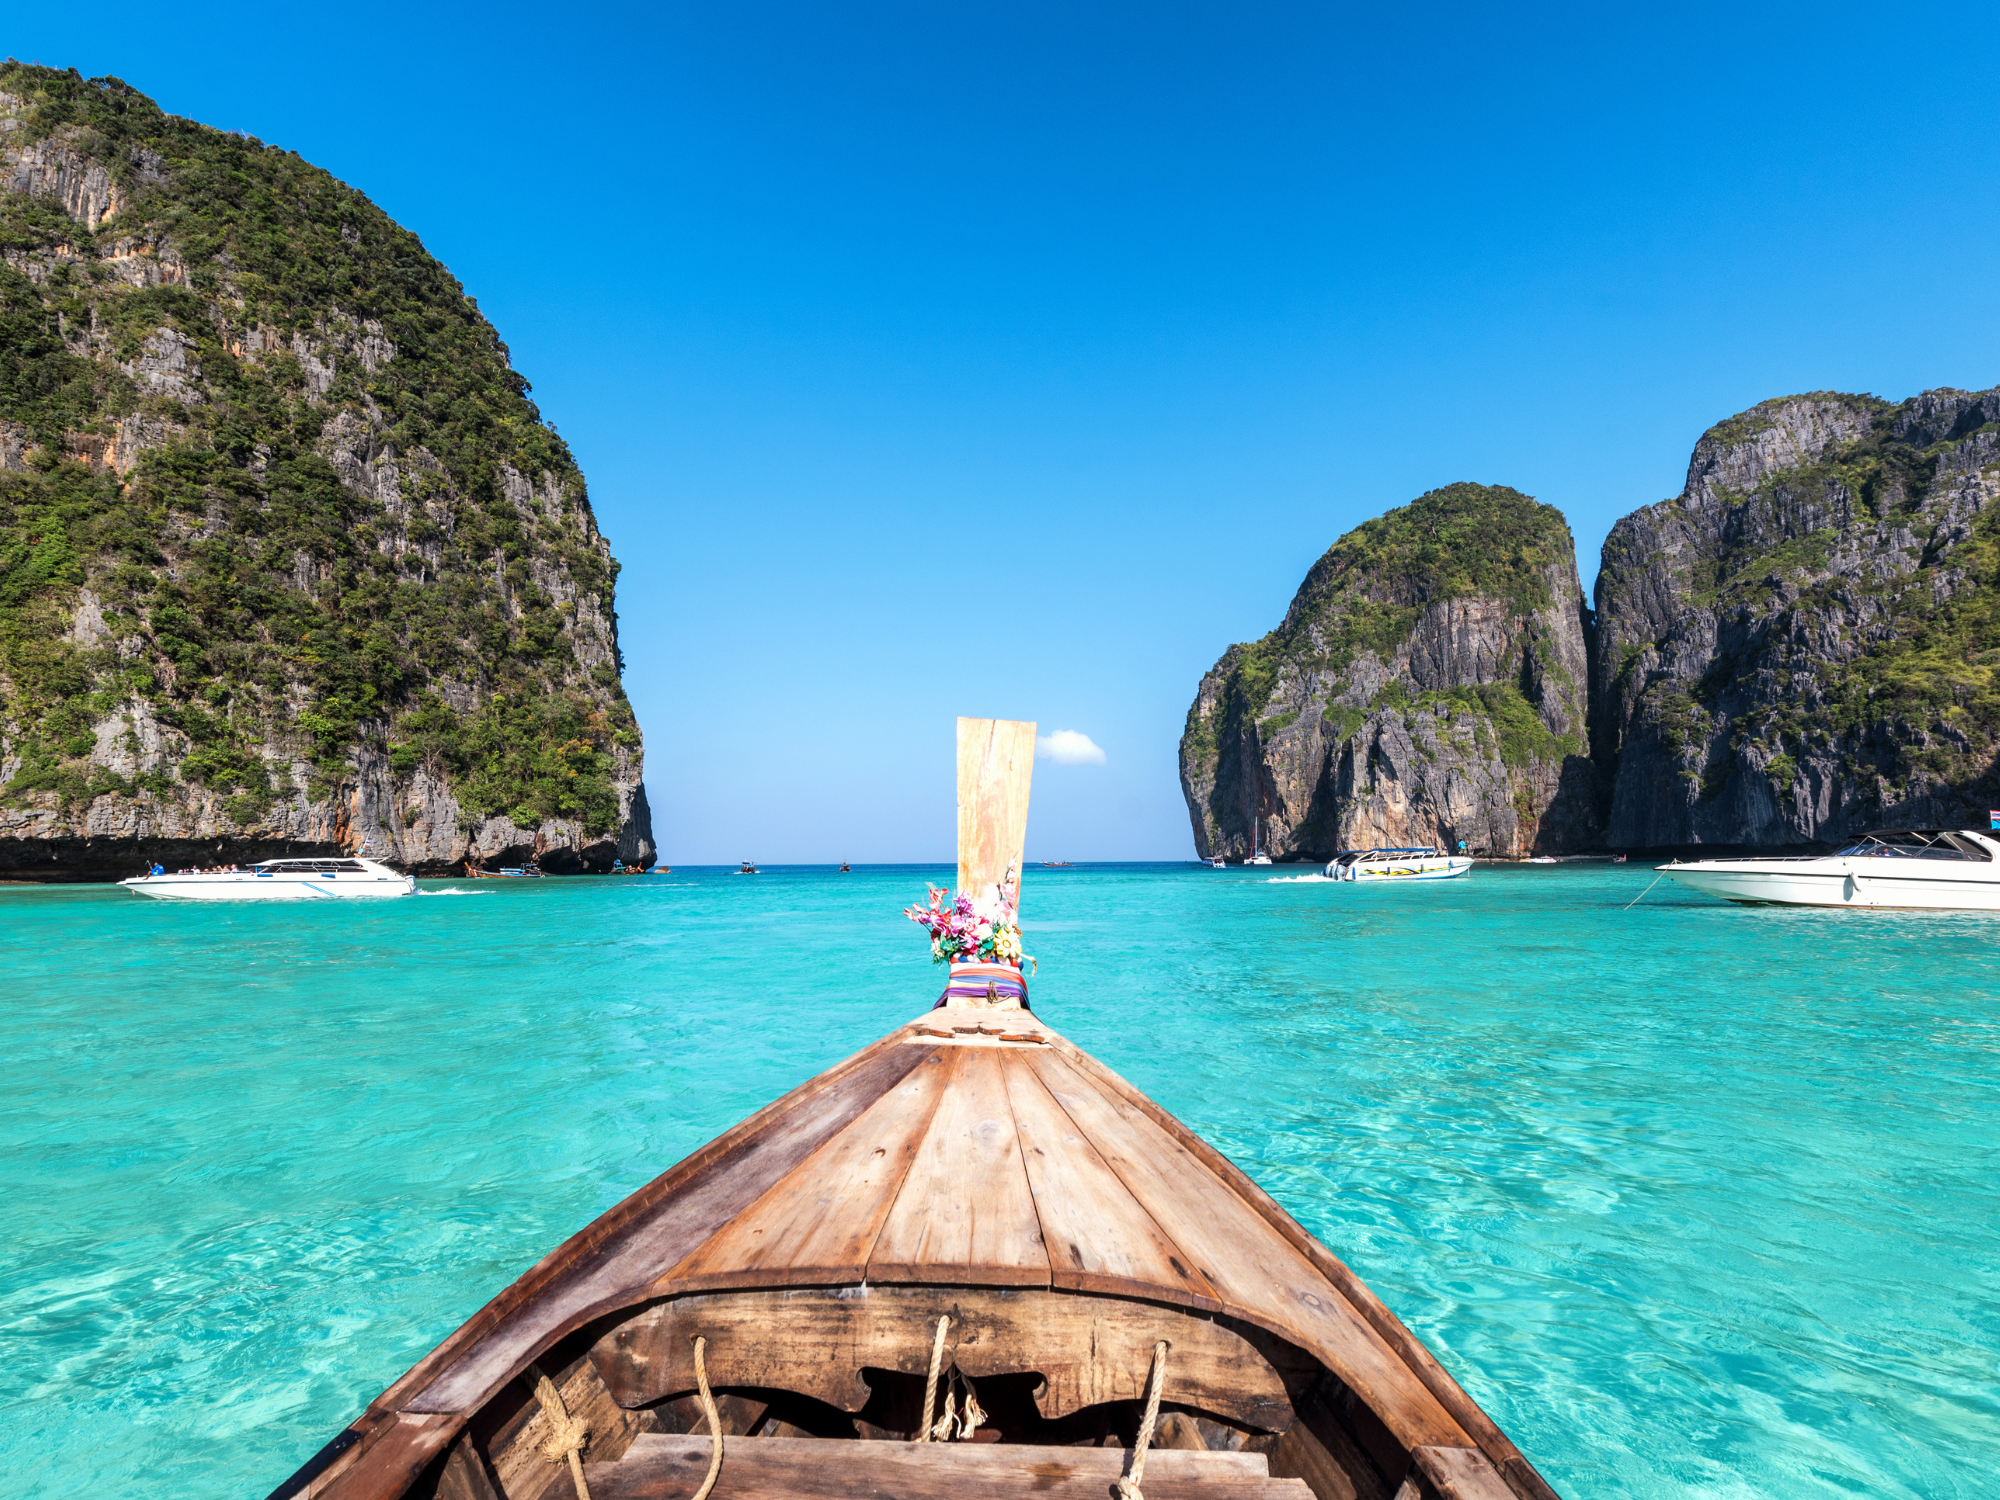 Things to do during your trip to thailand from uae - Take a boat trip to phi phi islands